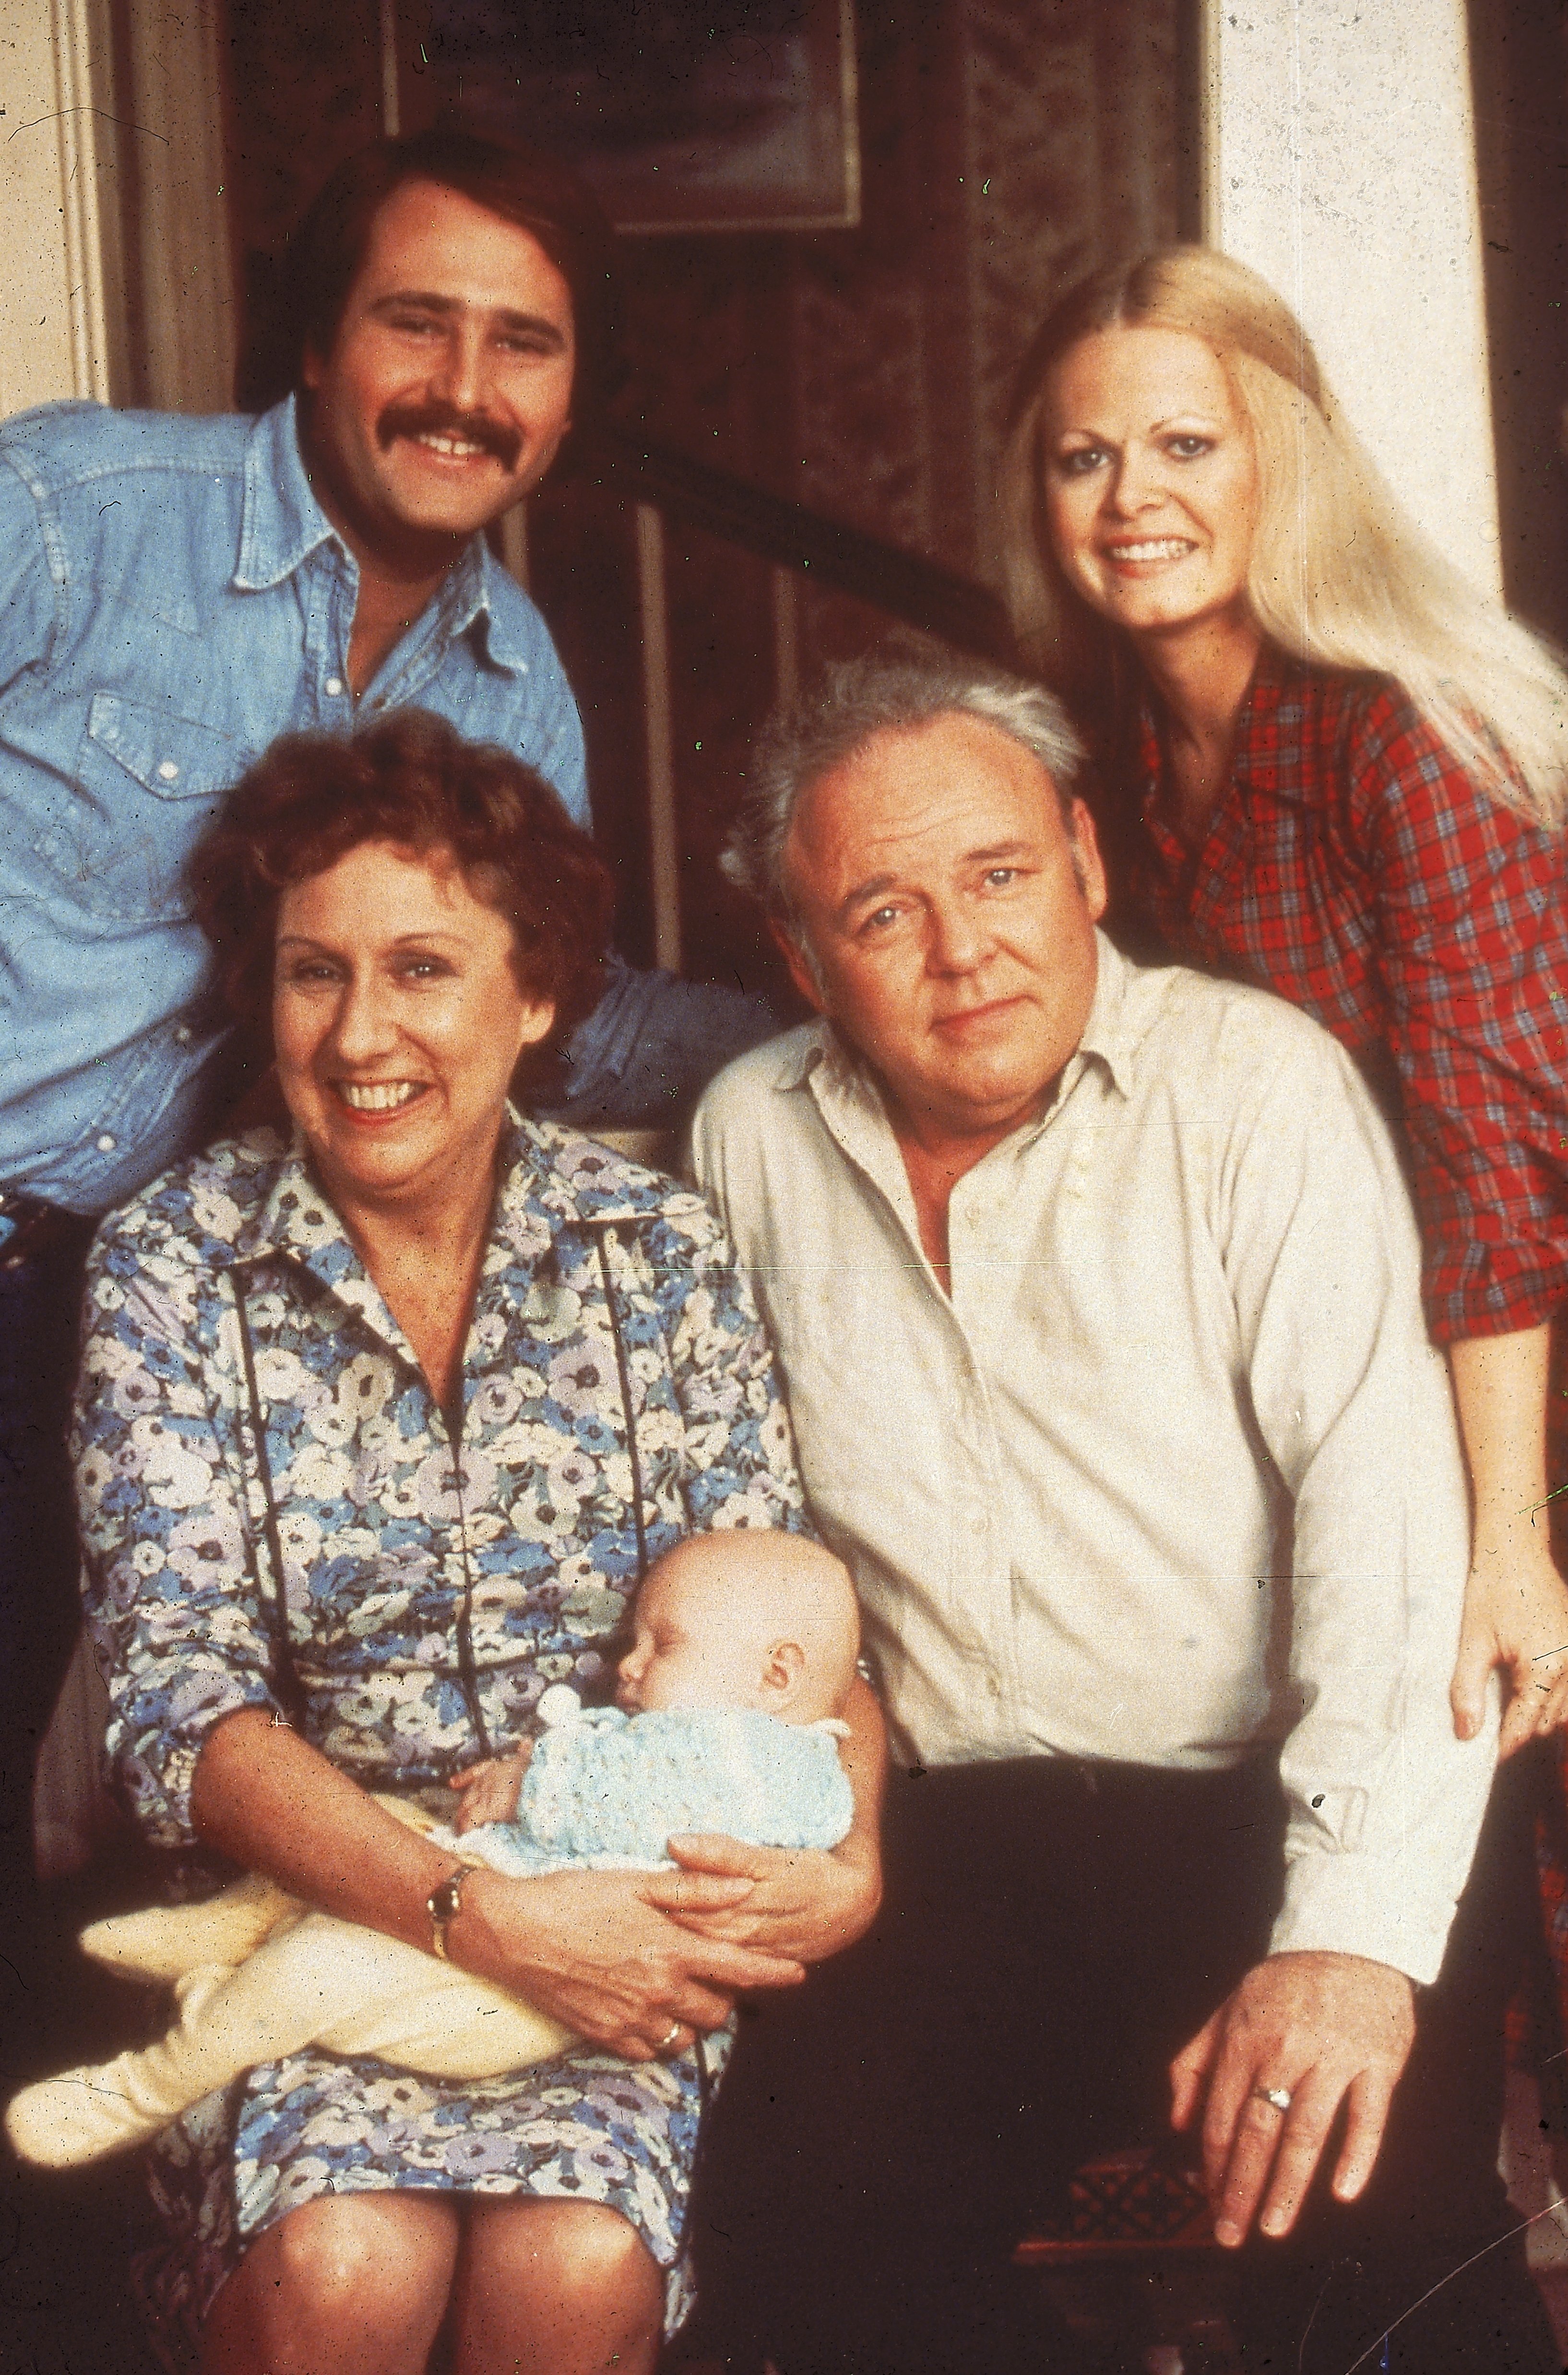 Portrait of the cast of the TV show 'All in the Family'.  Clockwise from bottom right: Carroll O'Connor (1924 - 2001), Jean Stapleton holding Corey M Miller, Rob Reiner and Sally Struthers.  |  Source: Getty Images